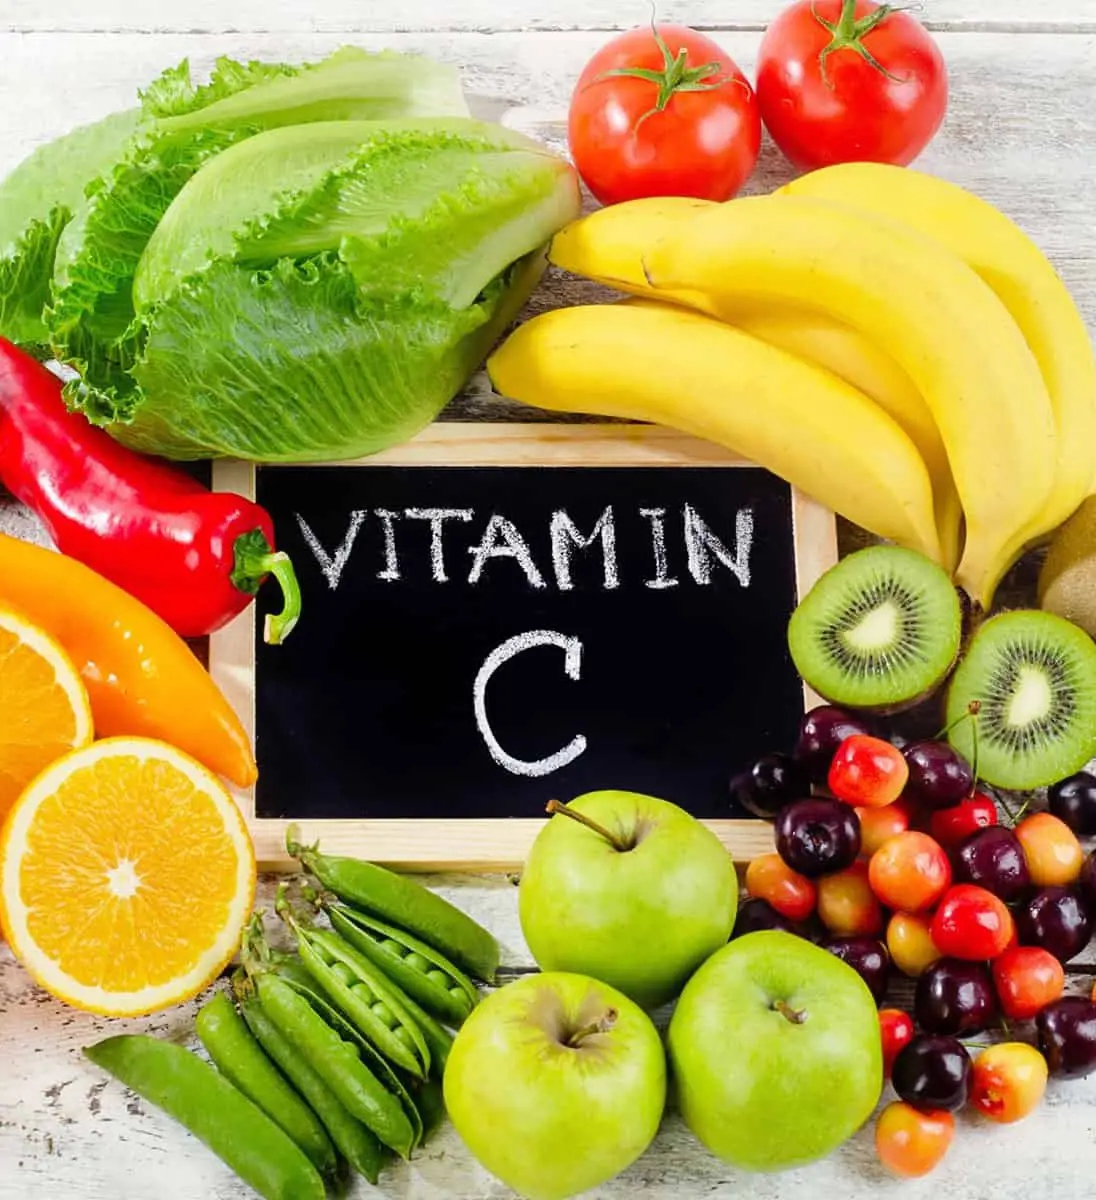 Vitamin C is an essential nutrient needed by a human body that has many health benefits.